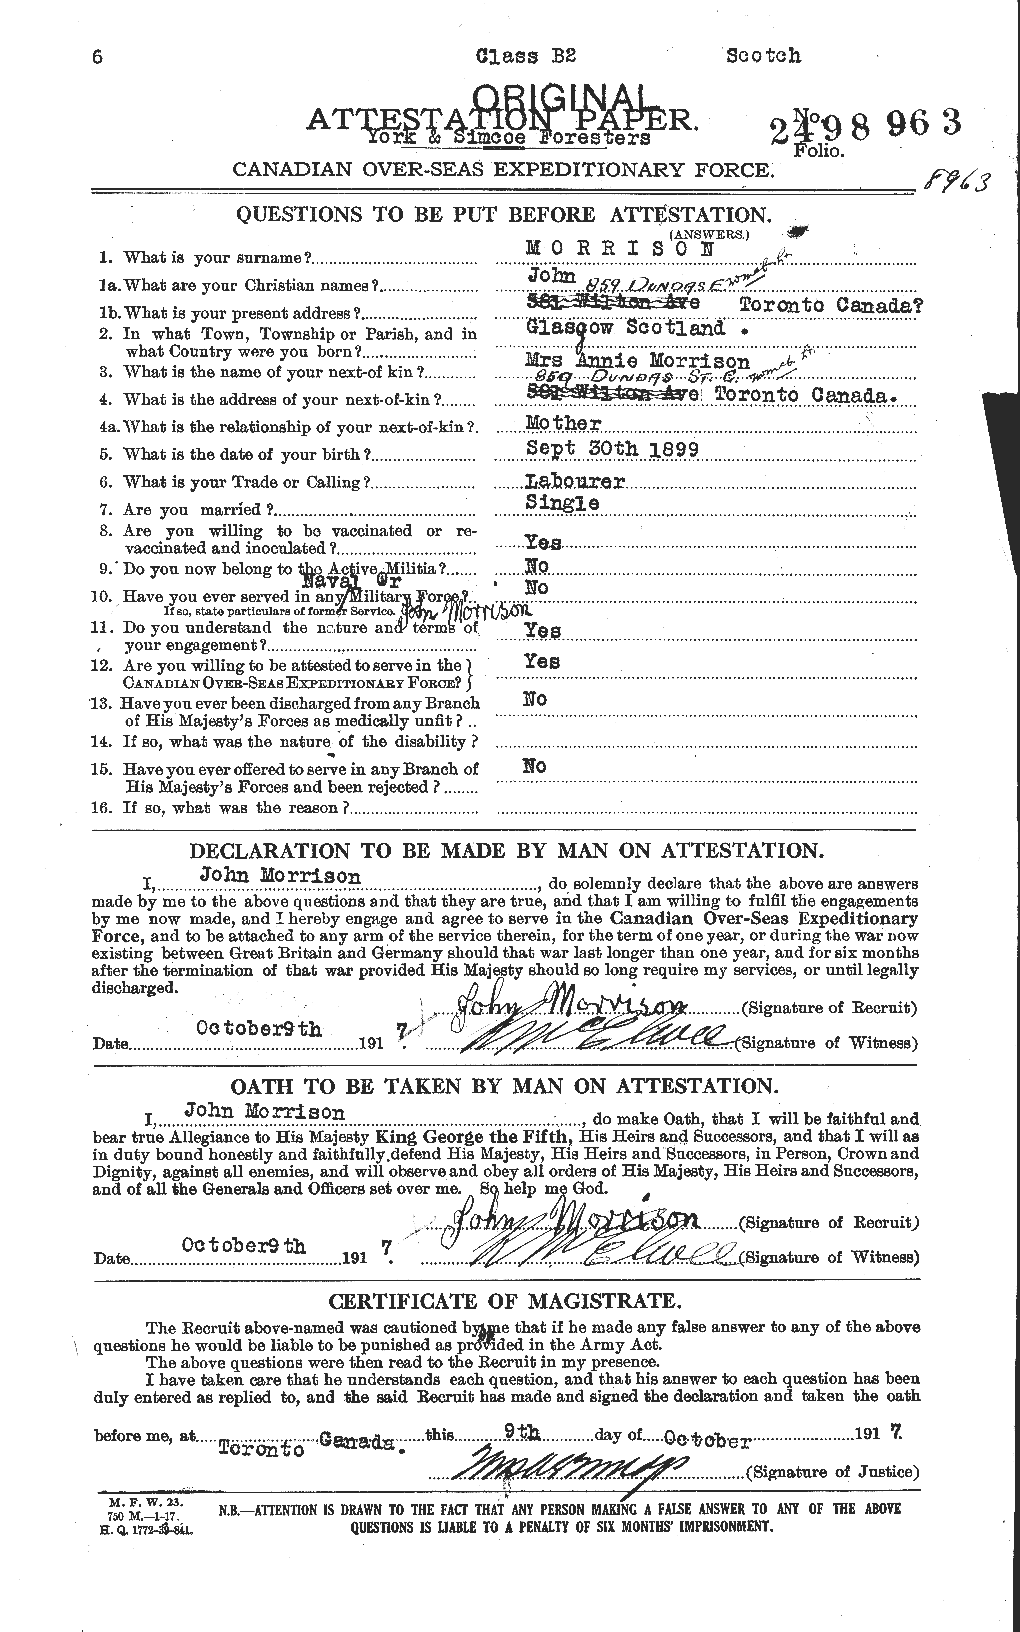 Personnel Records of the First World War - CEF 506994a